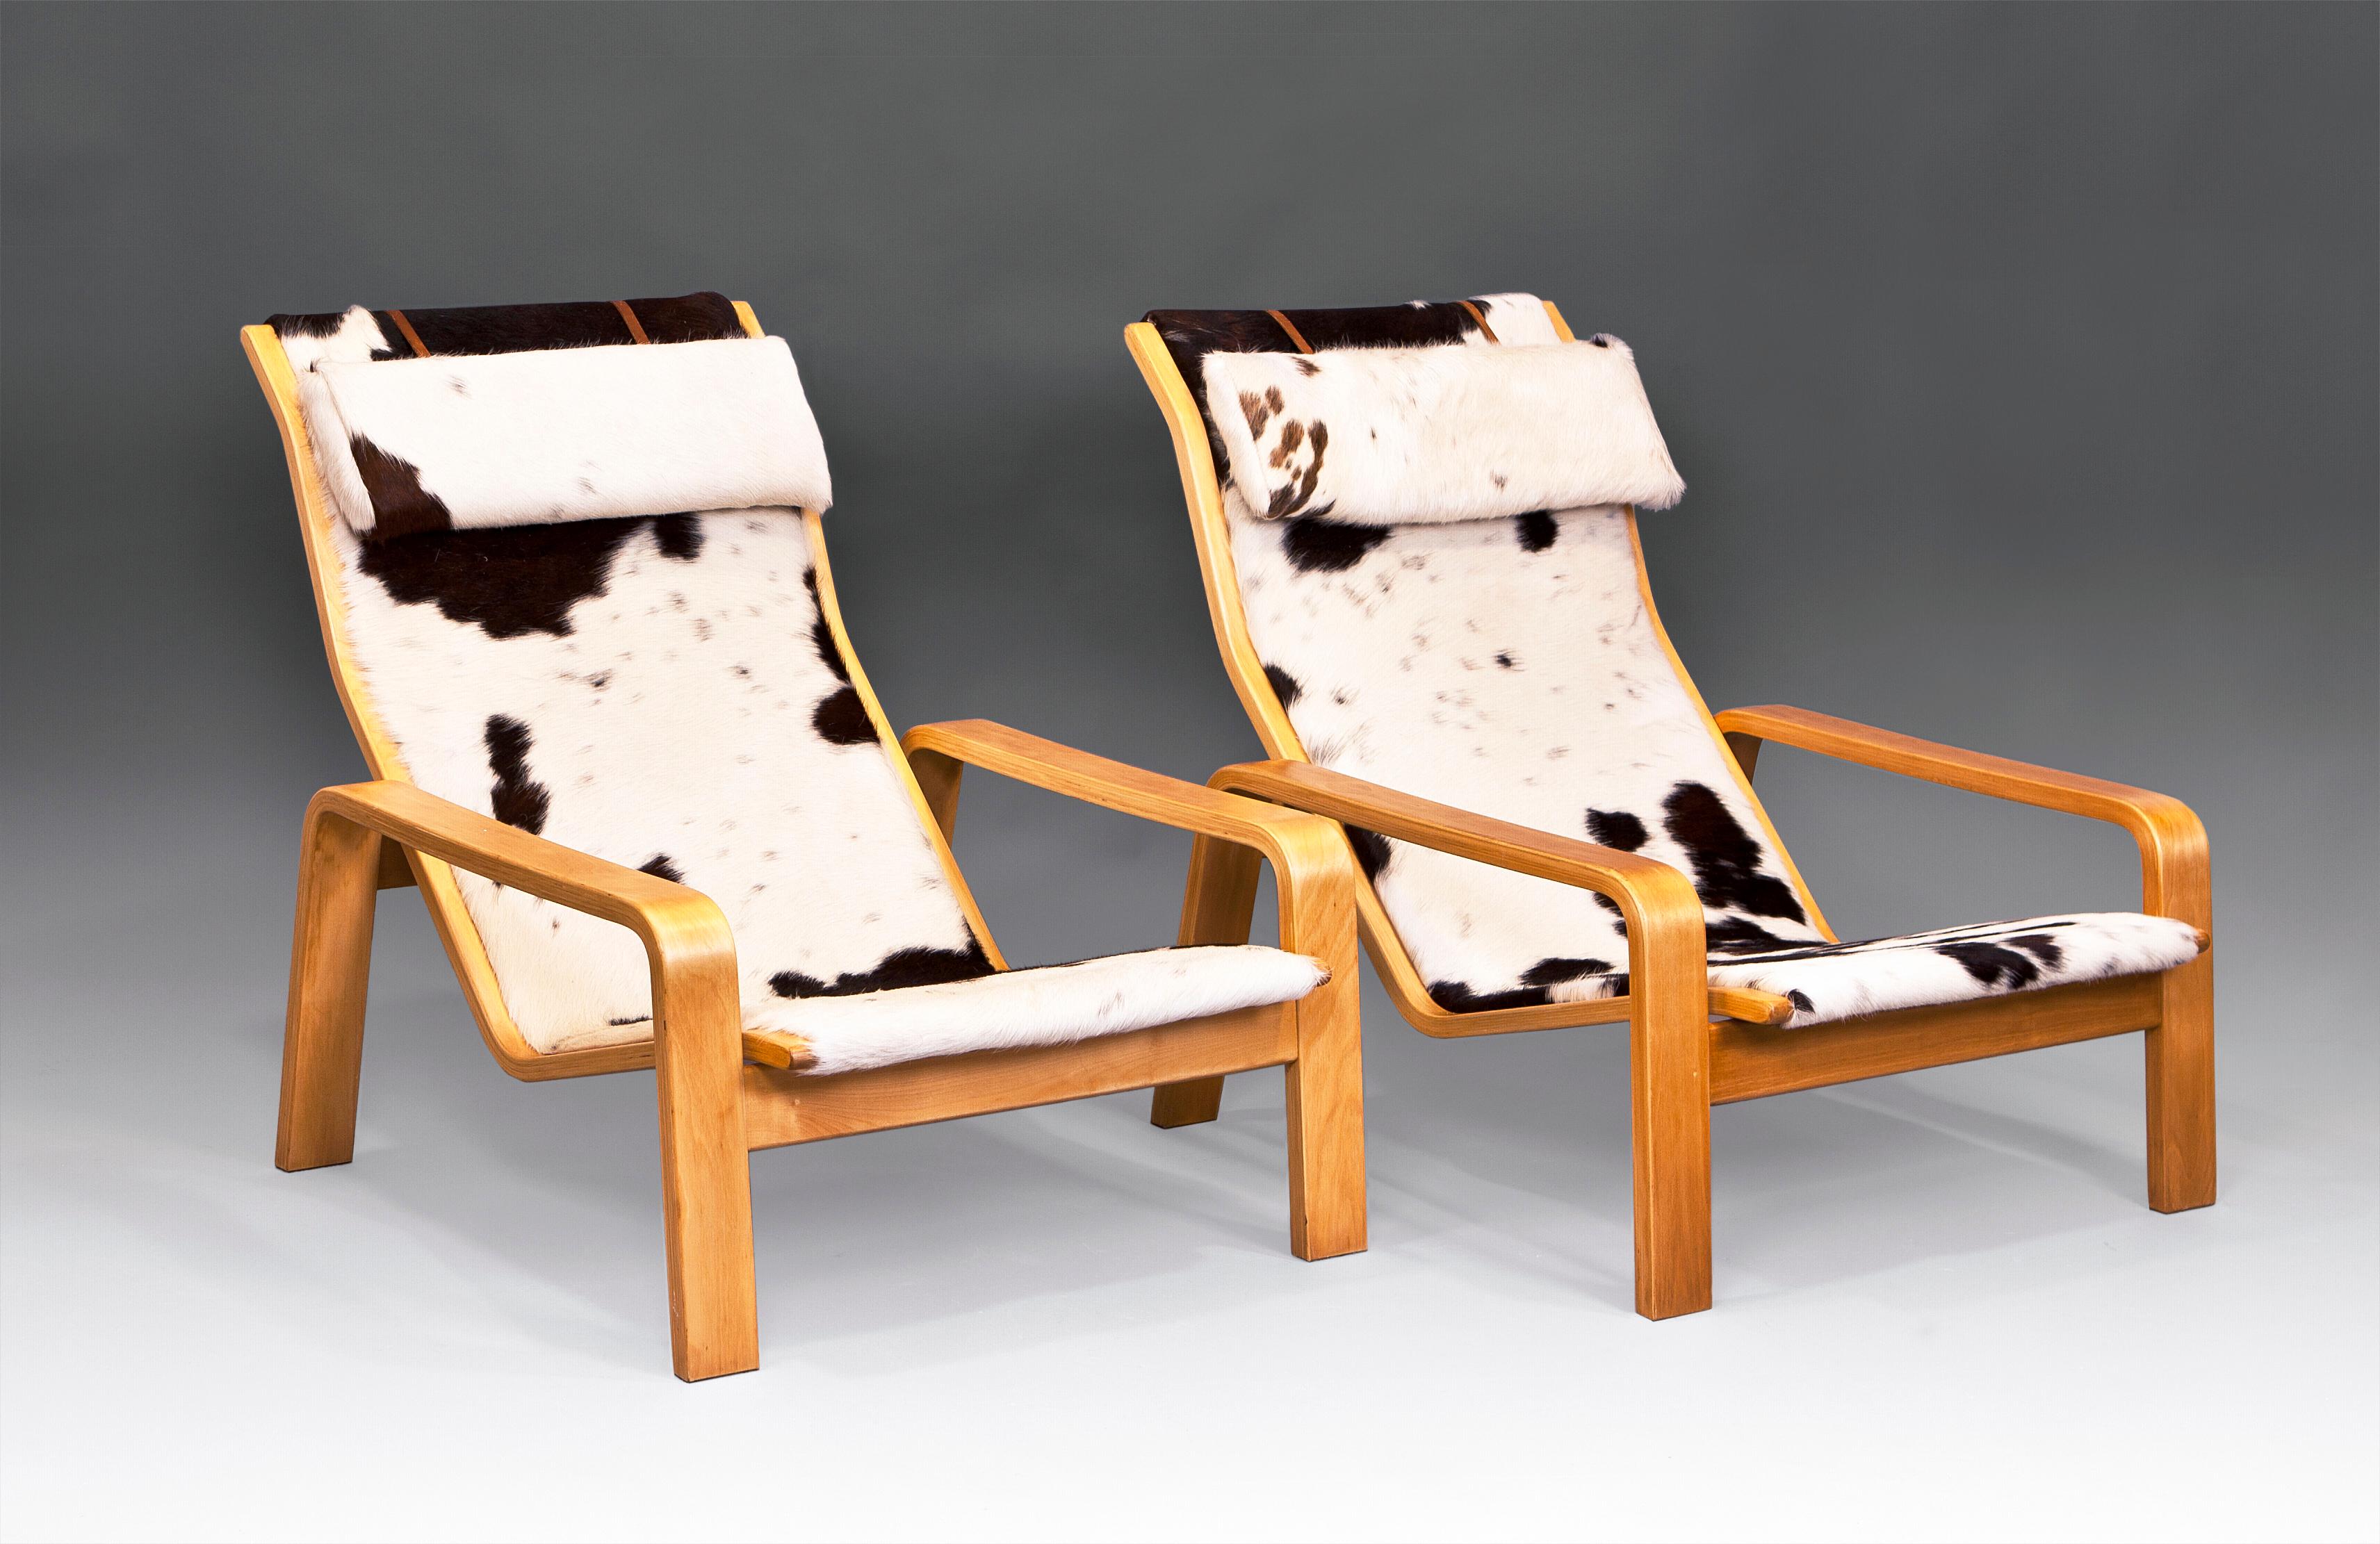 “Pulkka” lounge chairs in beech Wood and real cowhide leather by Ilmari Lappalainen for Asko. Finland, 1960s.
Very good condition, restored and reupholstered in authentic cowhide leather.
 